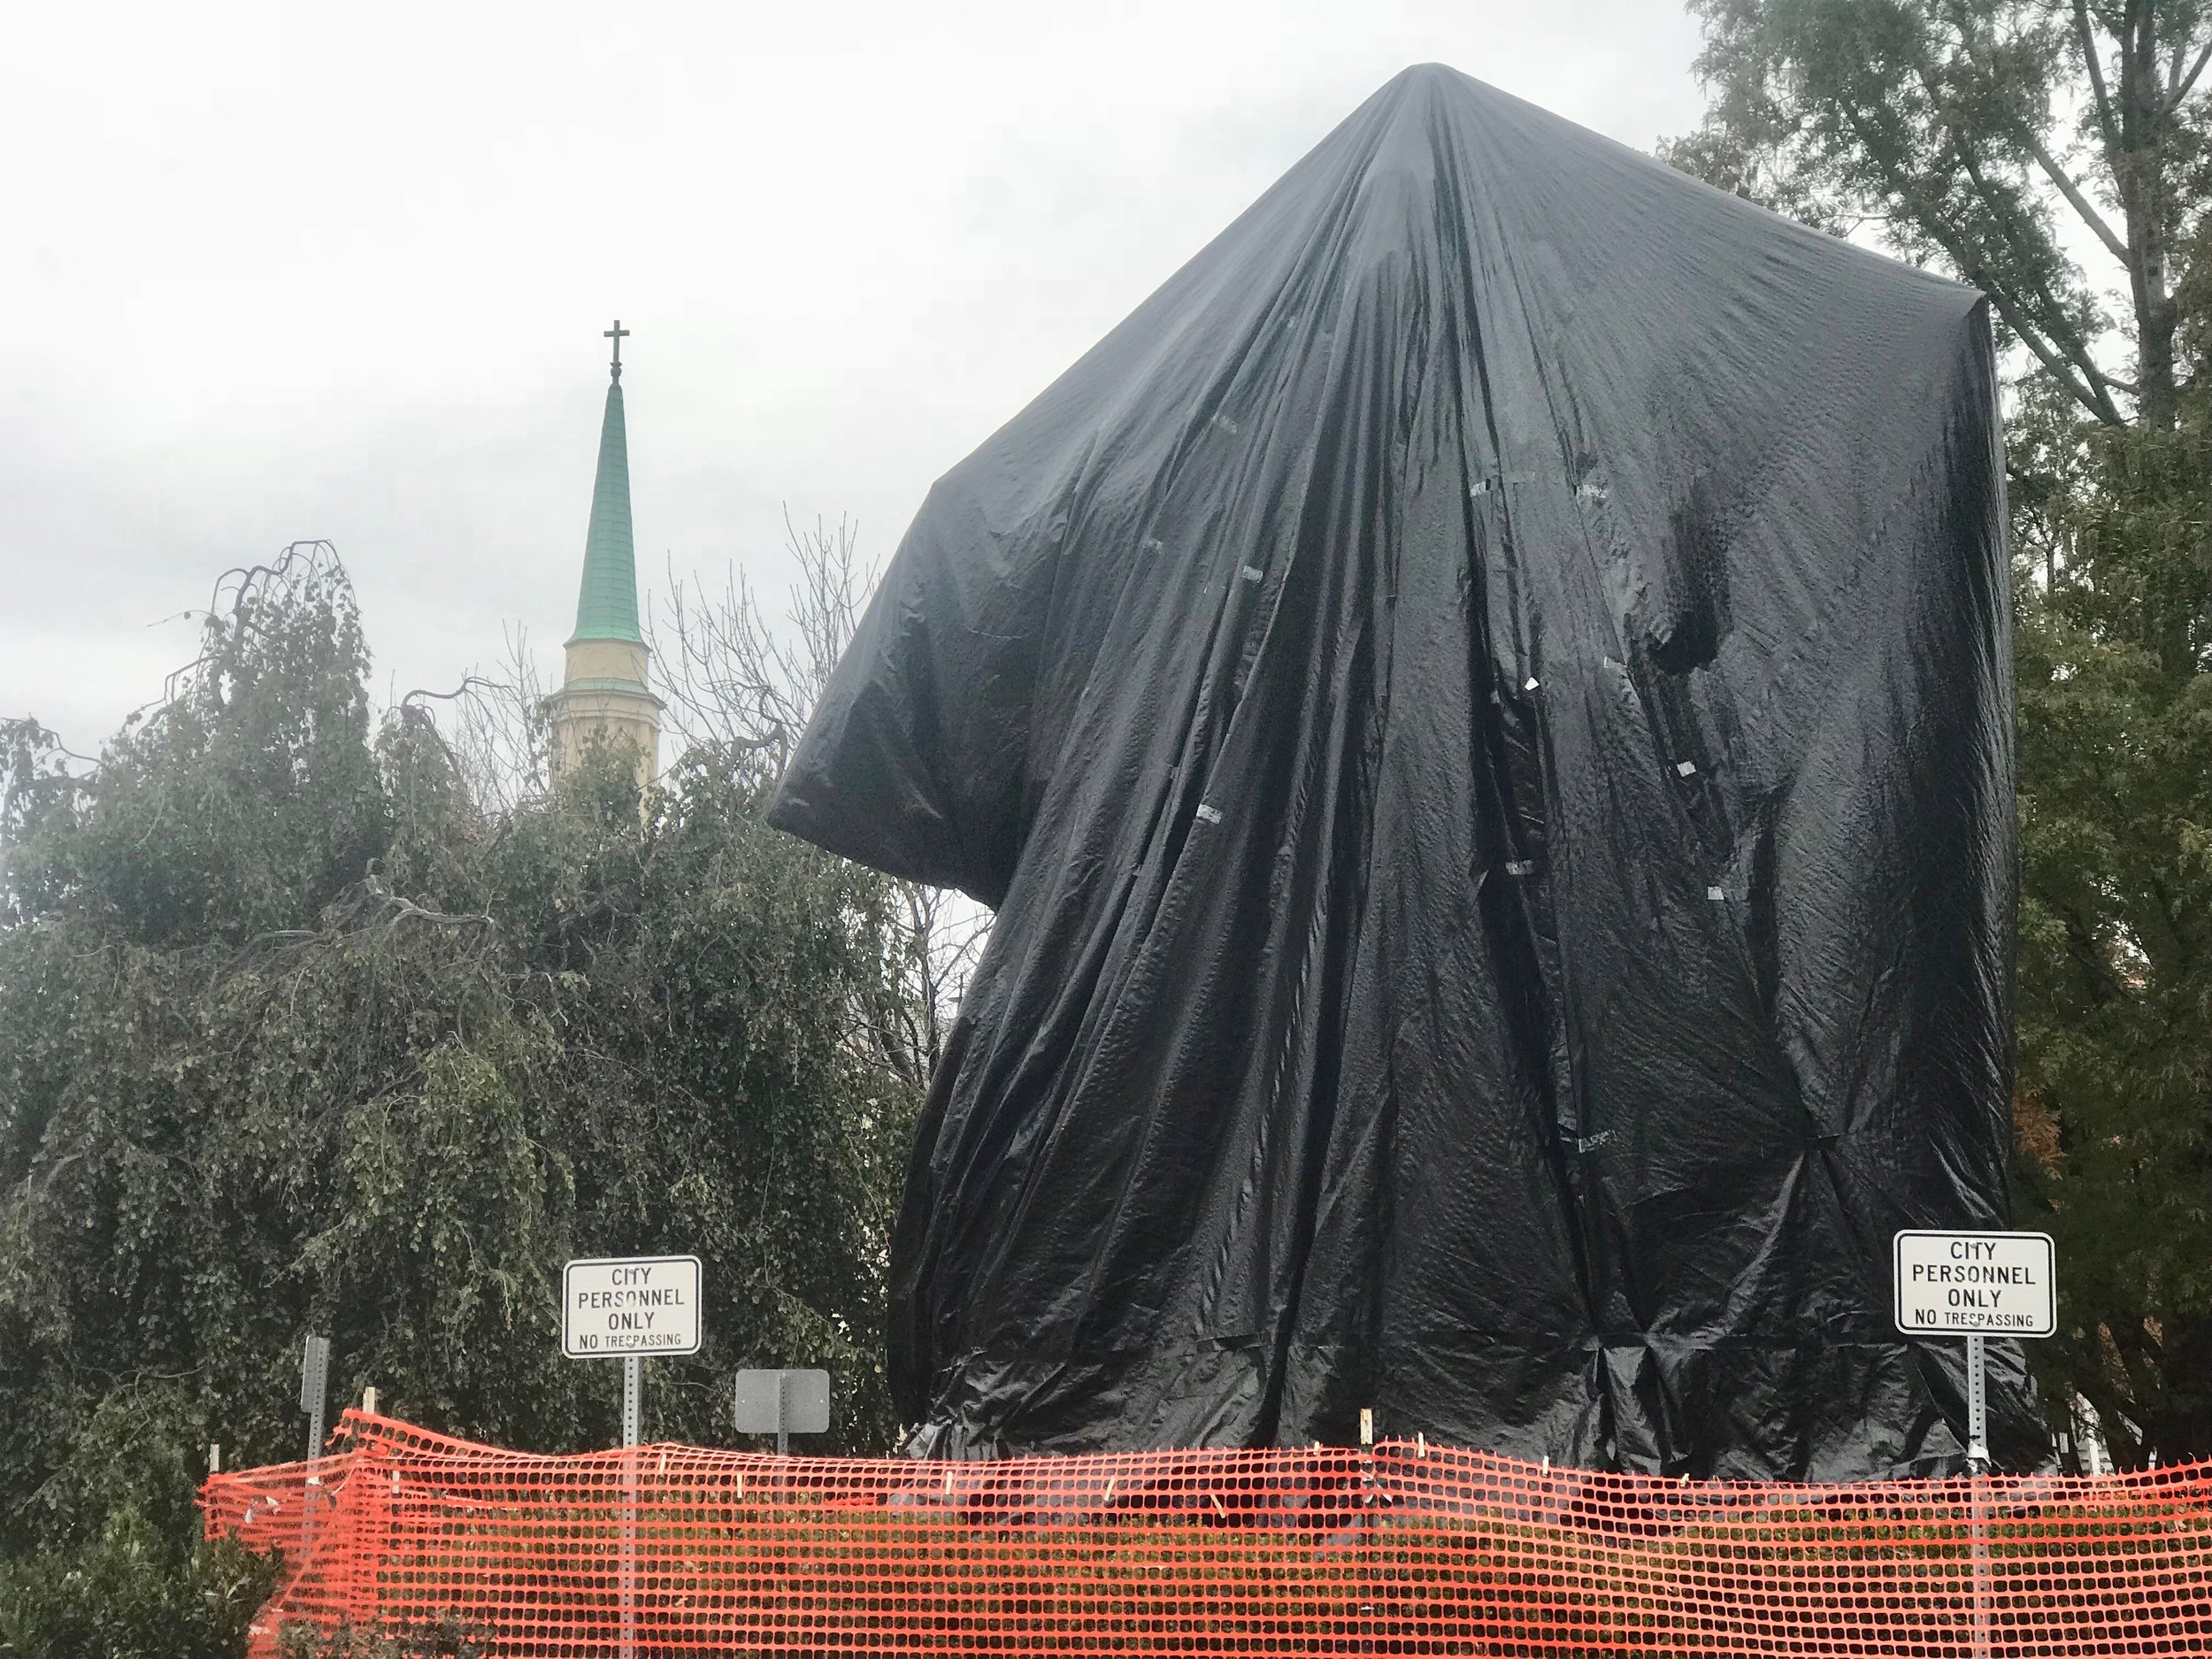  A plastic shroud covers the statue of Robert E. Lee in Charlottesville, Va., the subject of litigation and protests. 